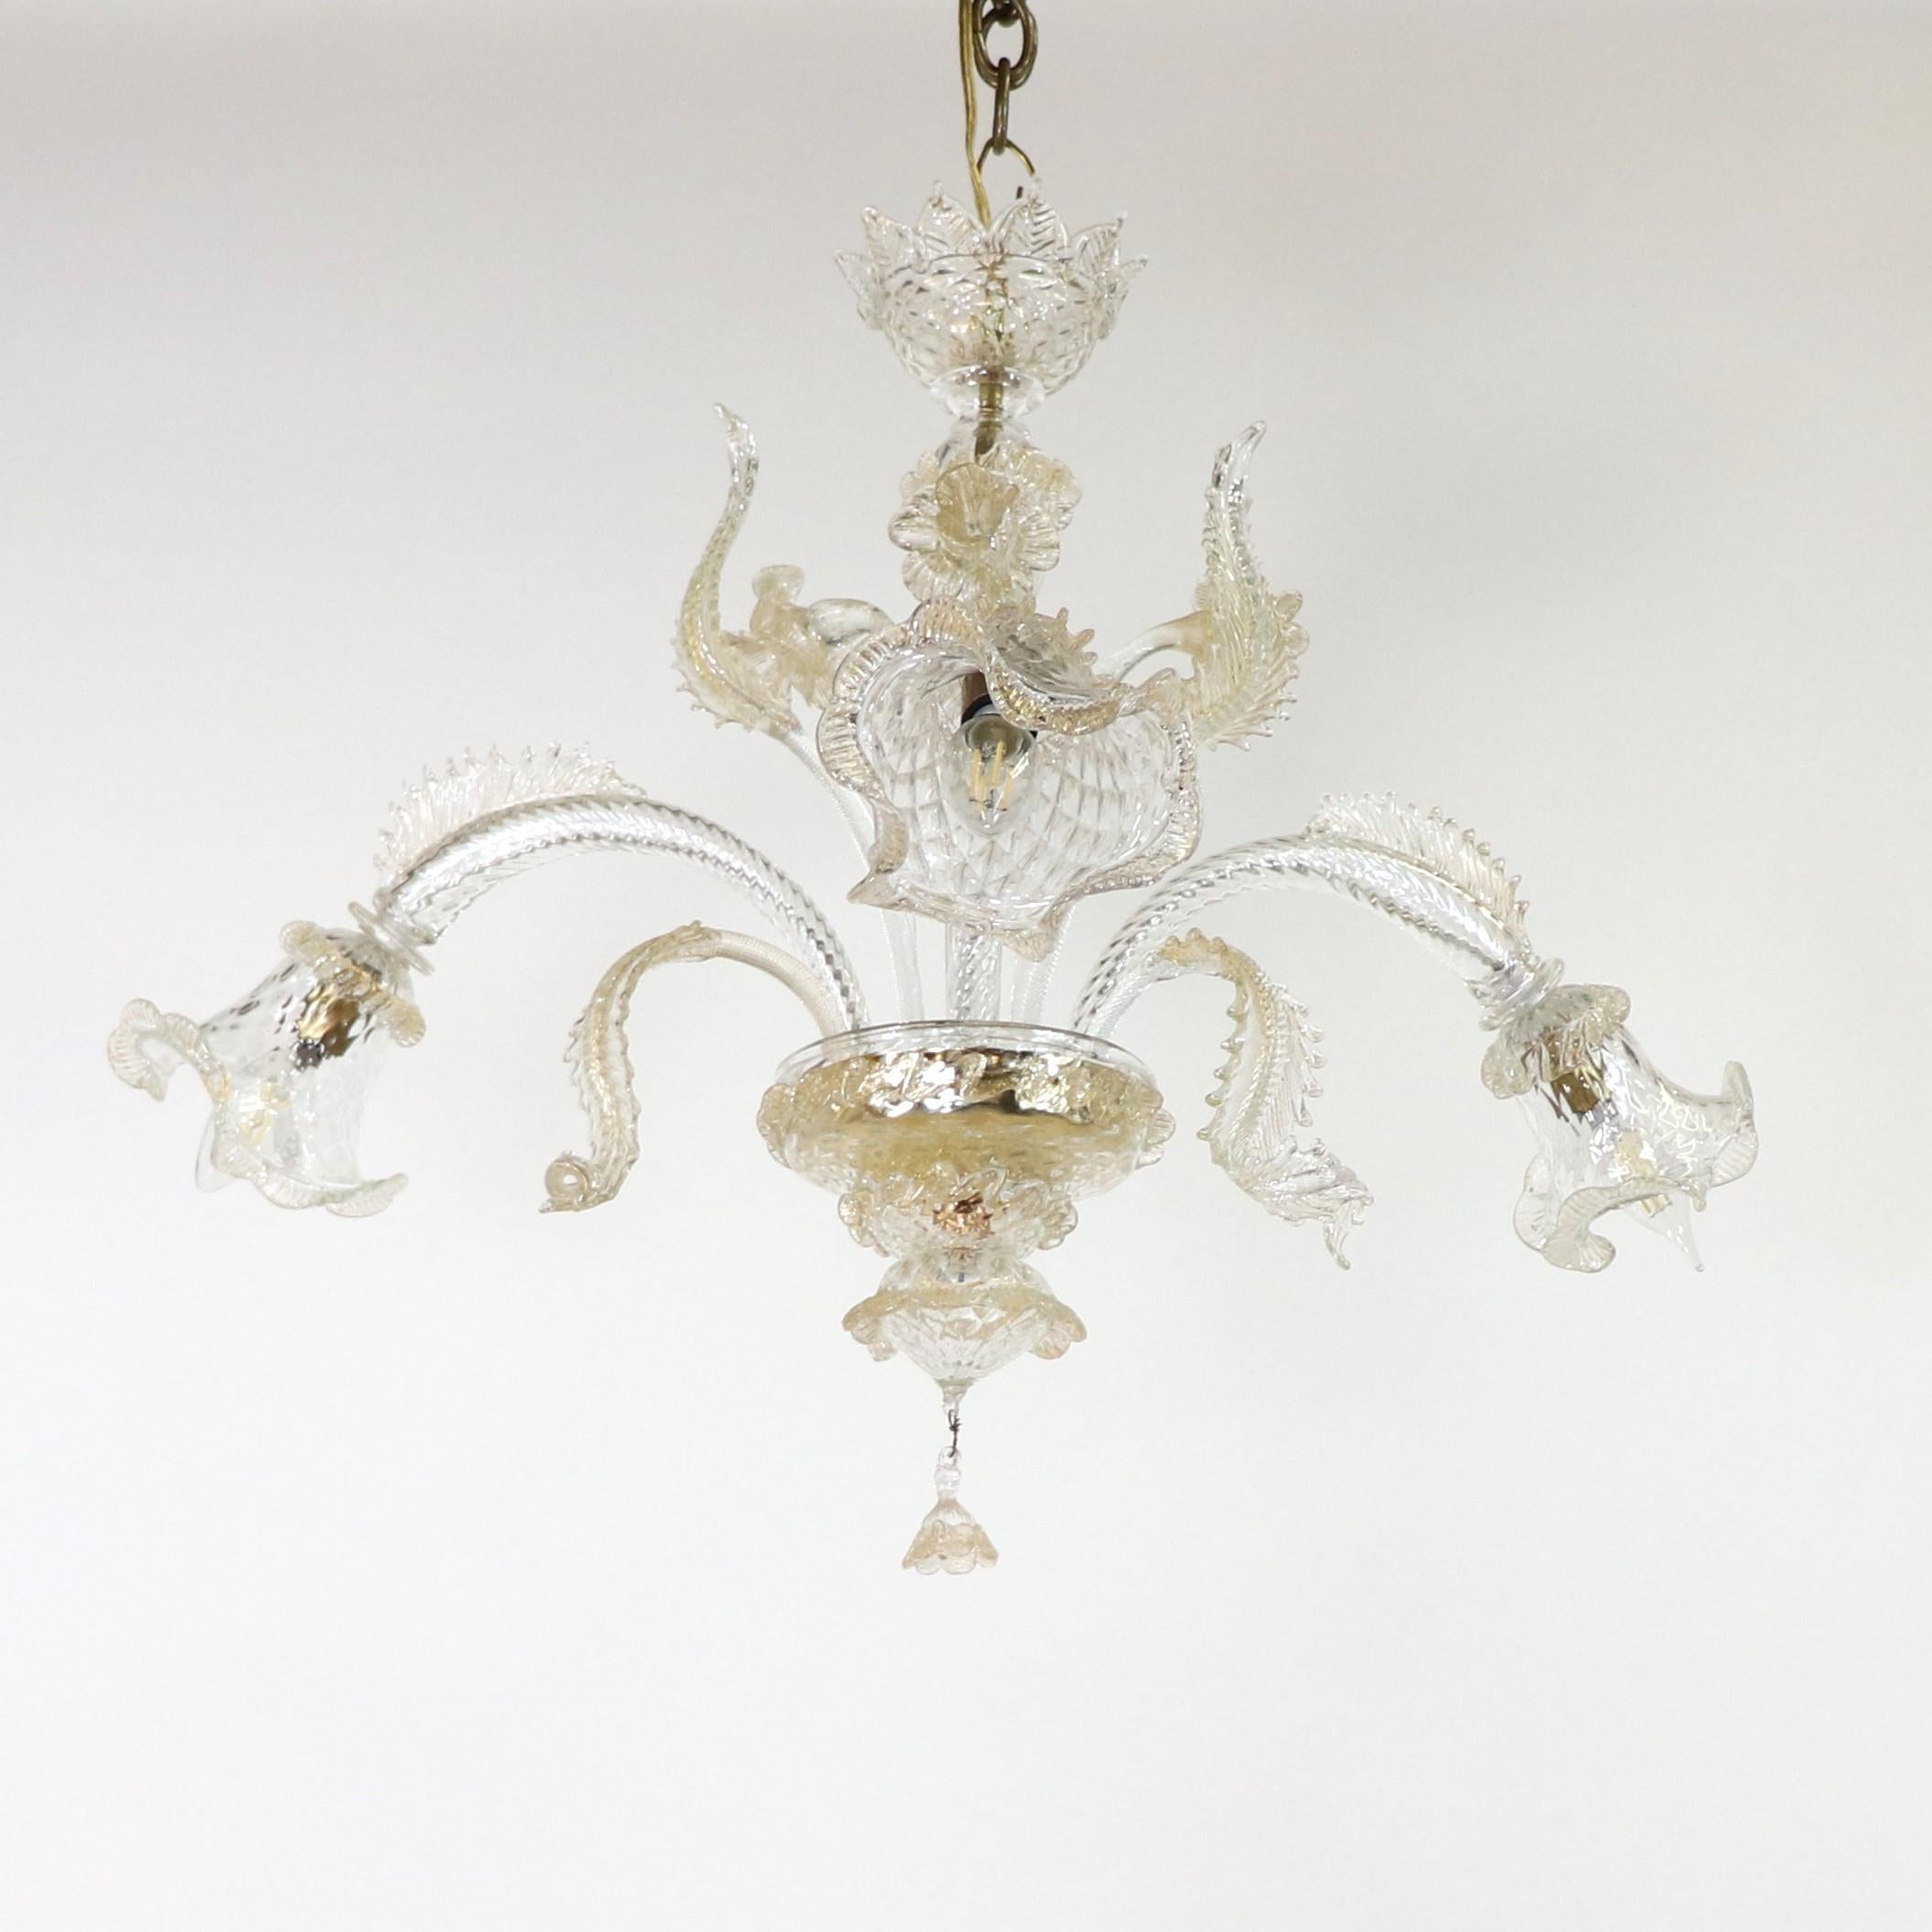 Italian Vintage Baroque Style Floral Gold Inflused Three Arm Cristallo Murano Chandelier For Sale